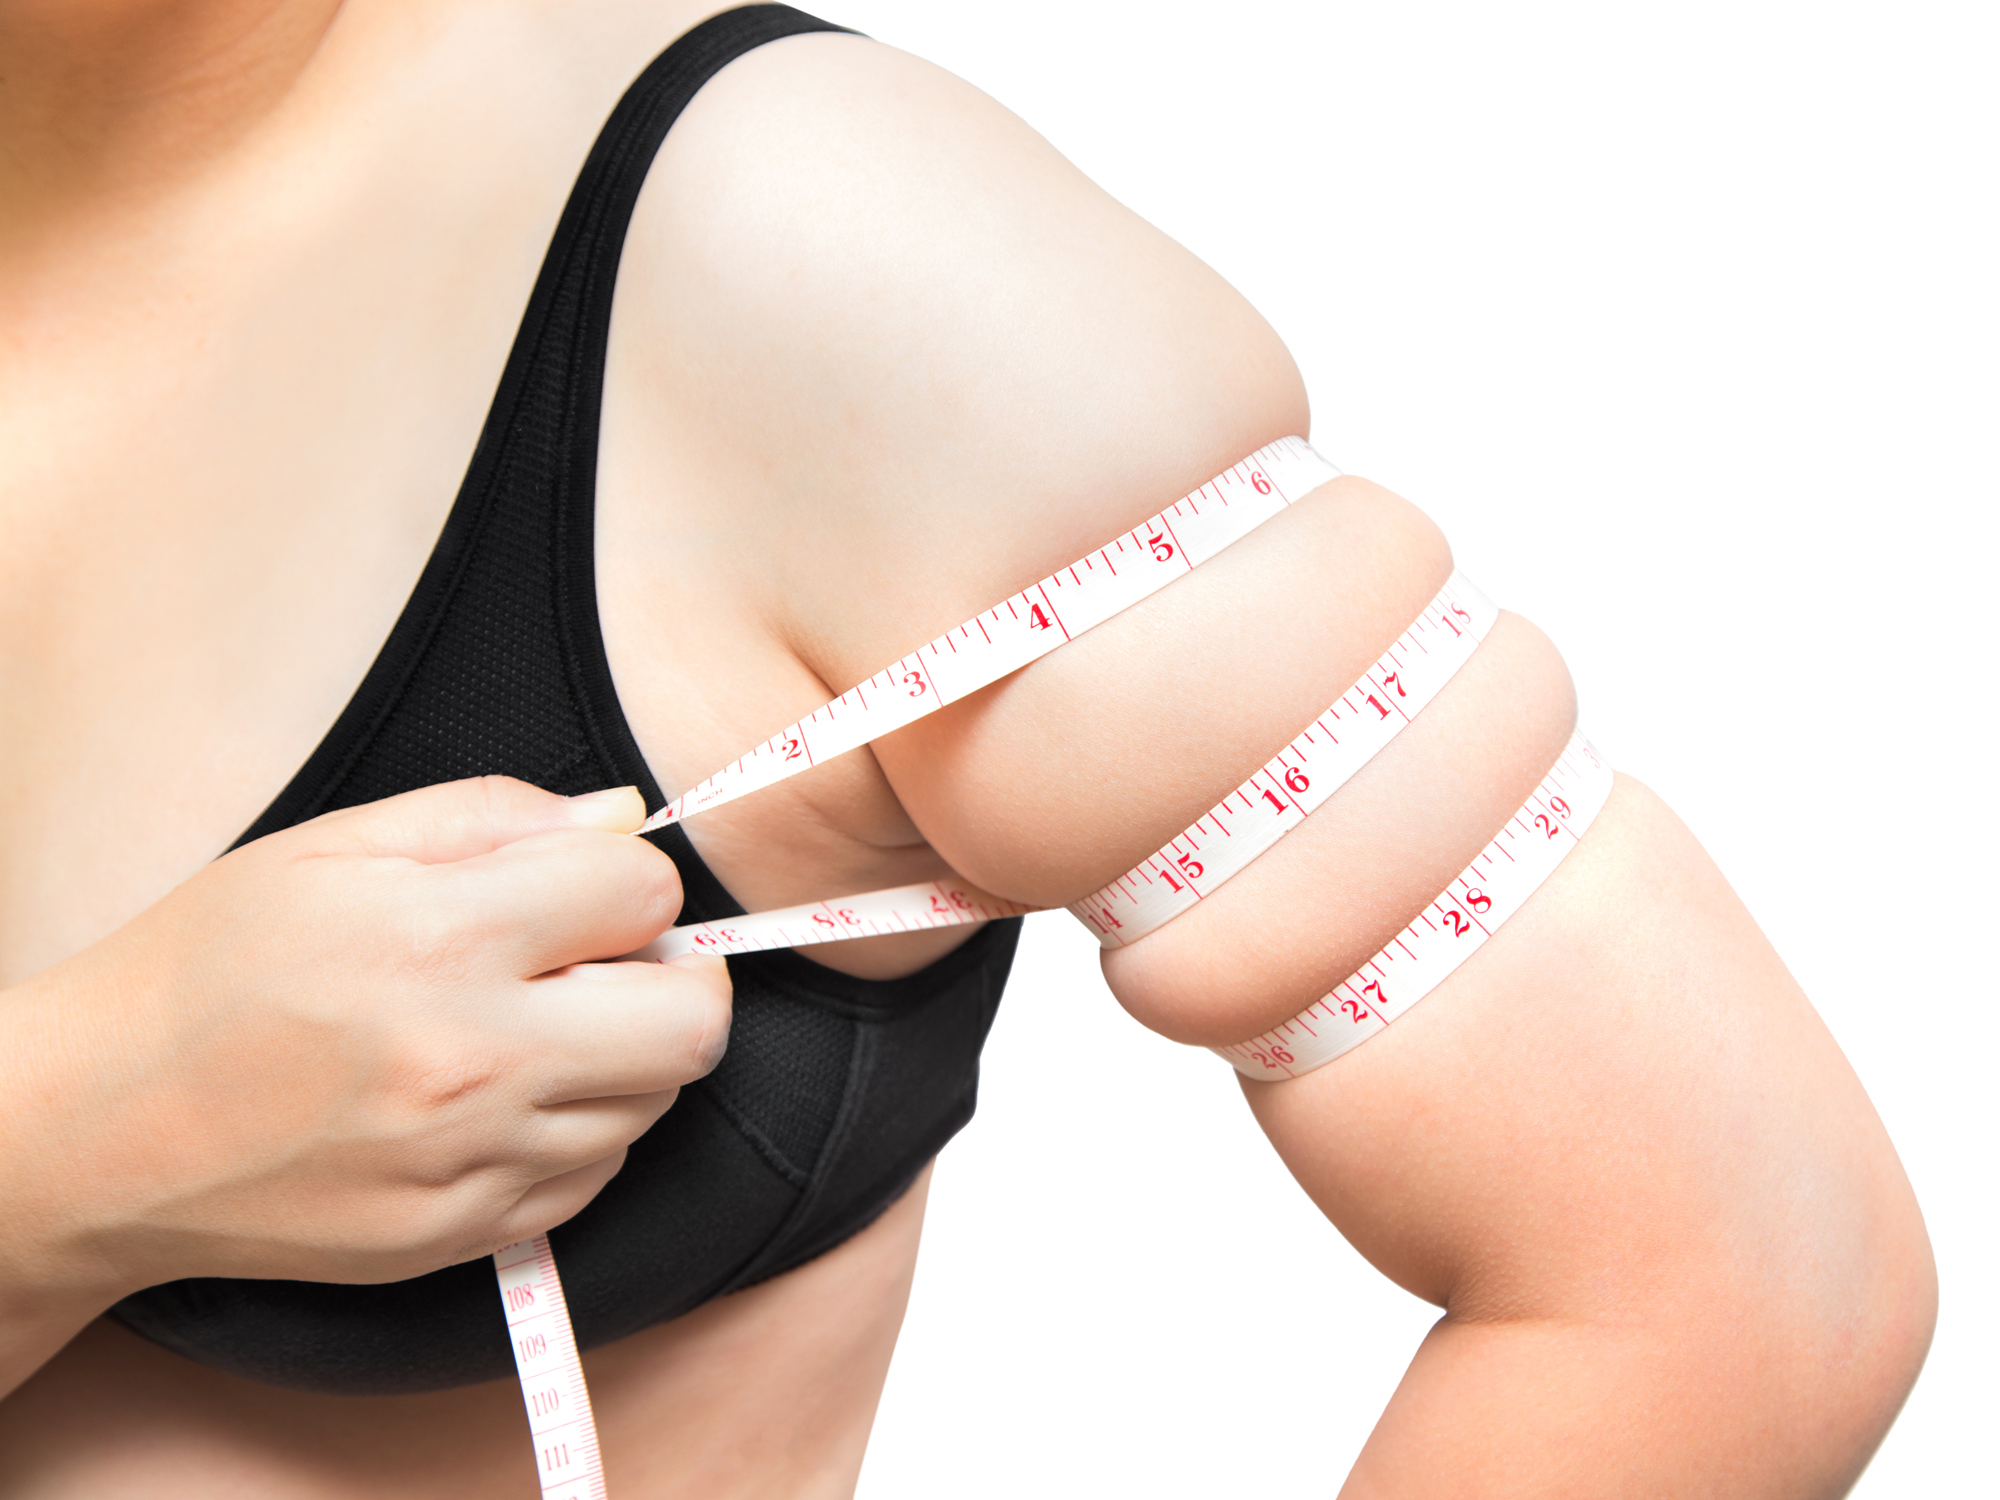 A better way to measure body fat is a better way to measure disease risk